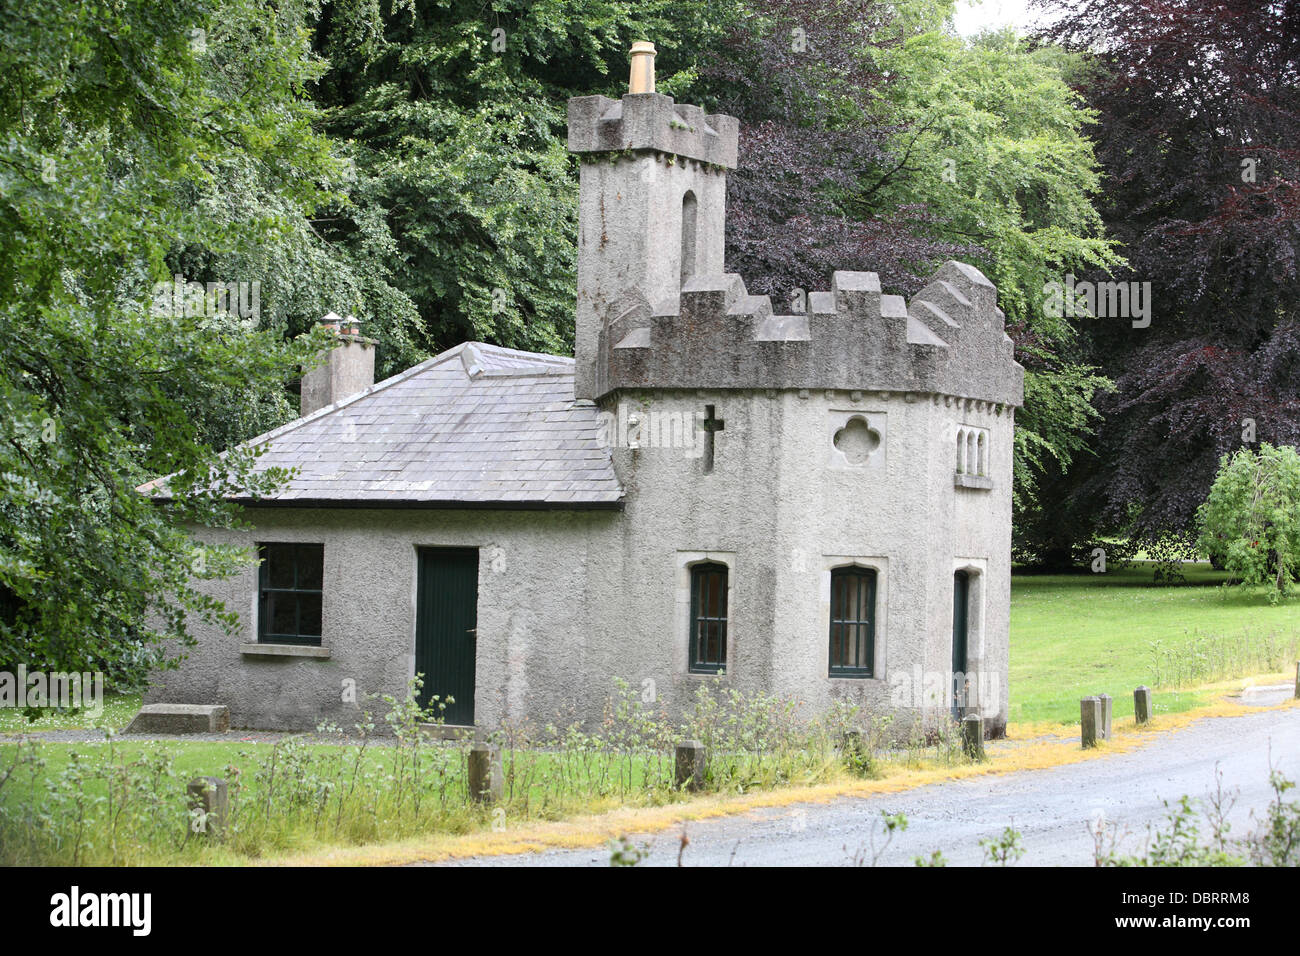 Gate house at Avondale House, county Wicklow ireland Stock Photo